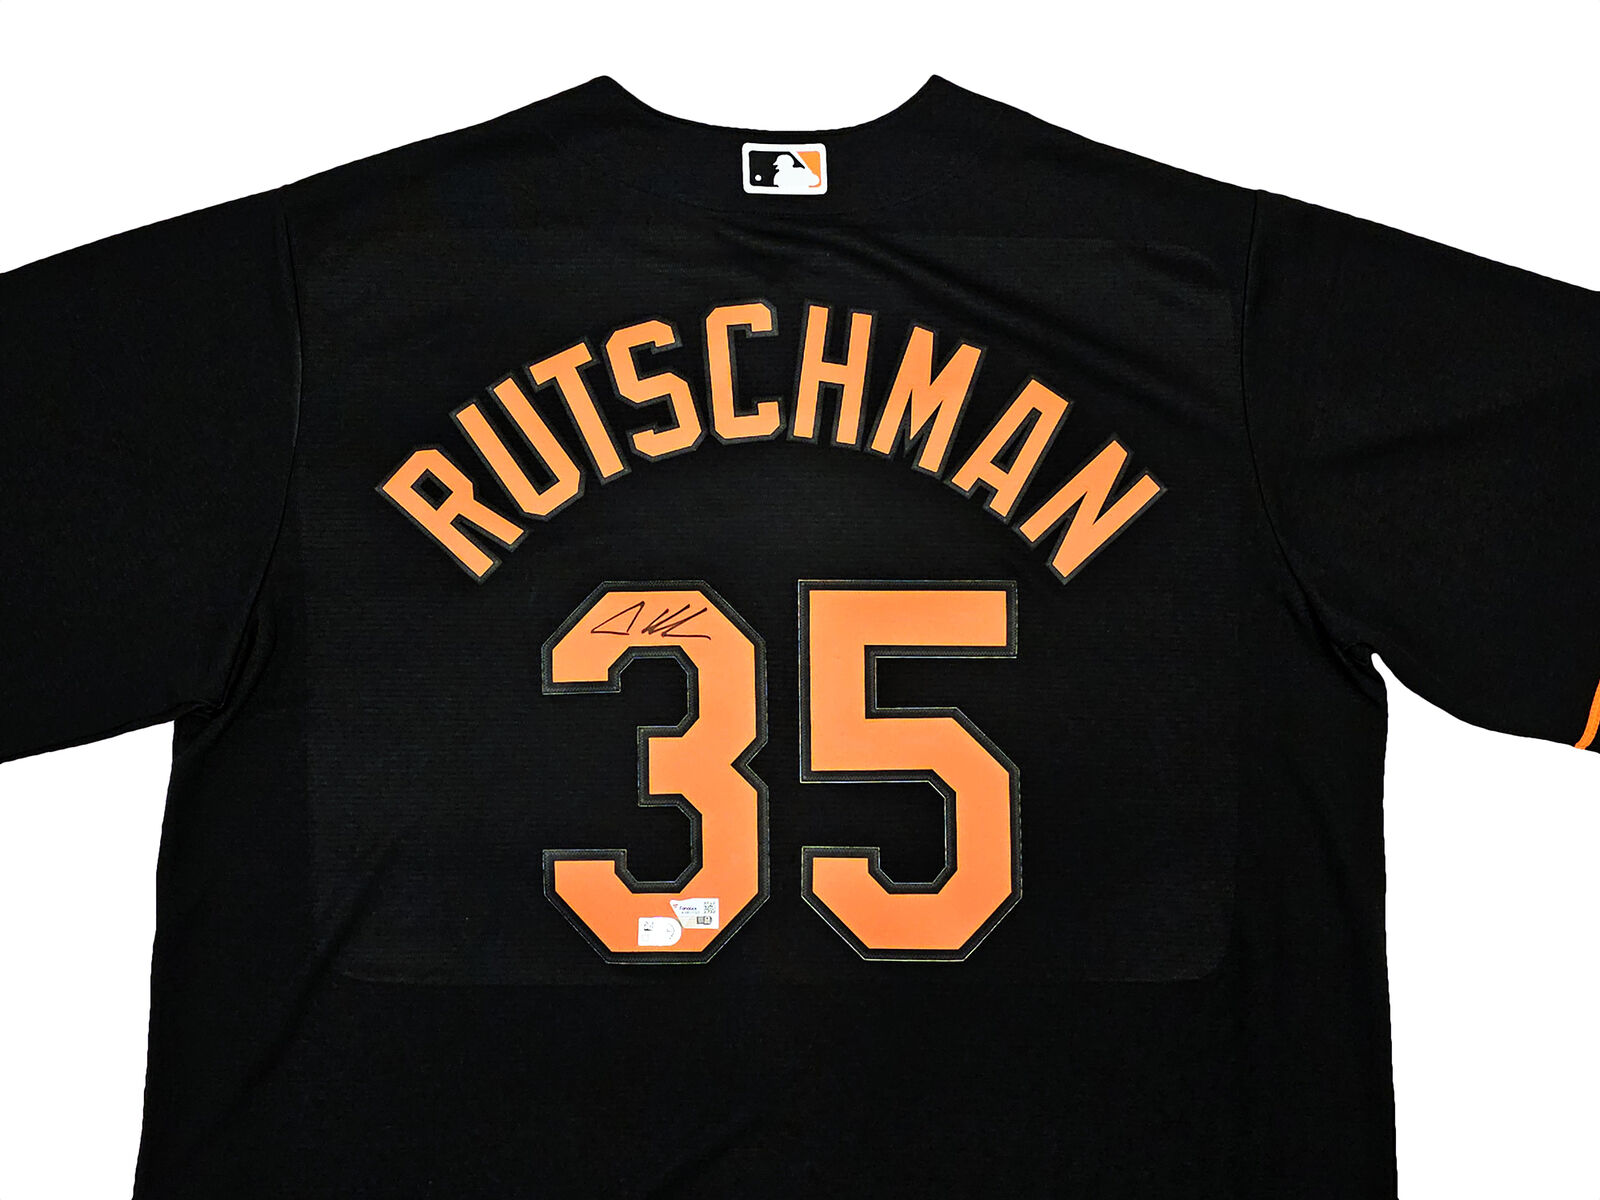 Adley Rutschman: Jersey - Game-Used (First Career HR at Camden Yards -  7/7/22 vs. Angels) - Size 48